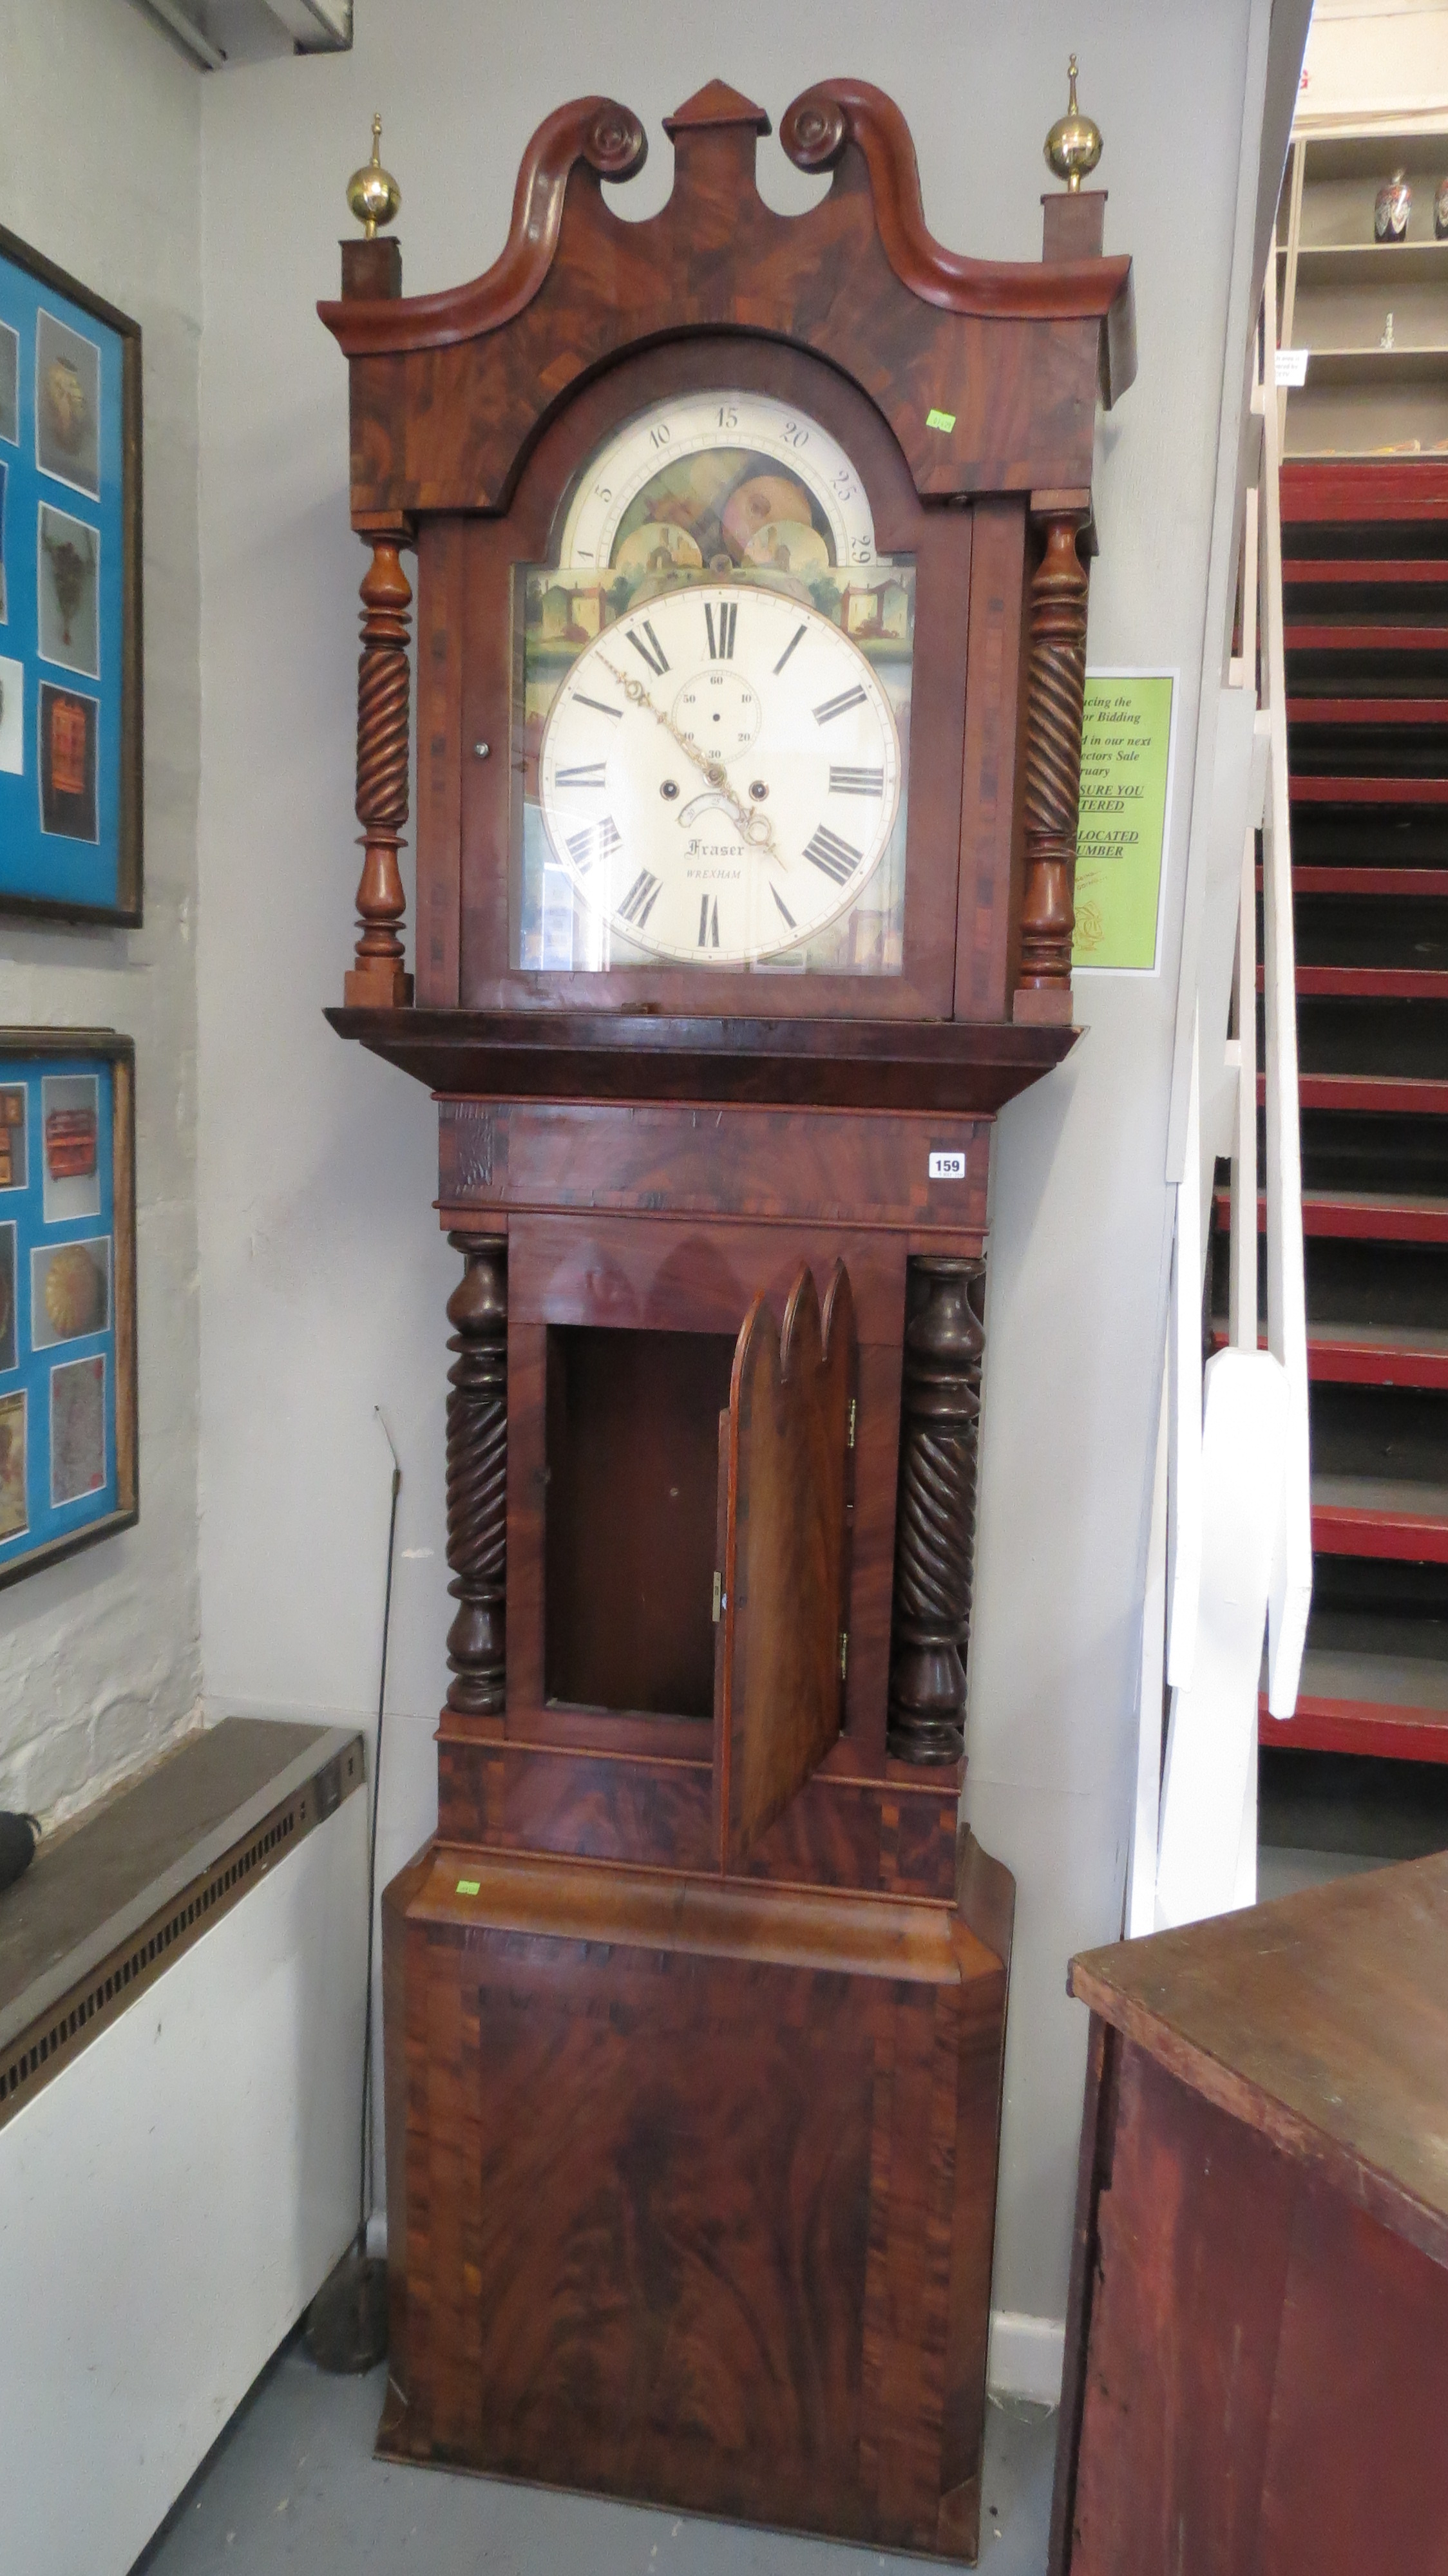 Fraser, Wrexham, an early 19th century mahogany long case clock having a painted dial with moon - Image 2 of 2